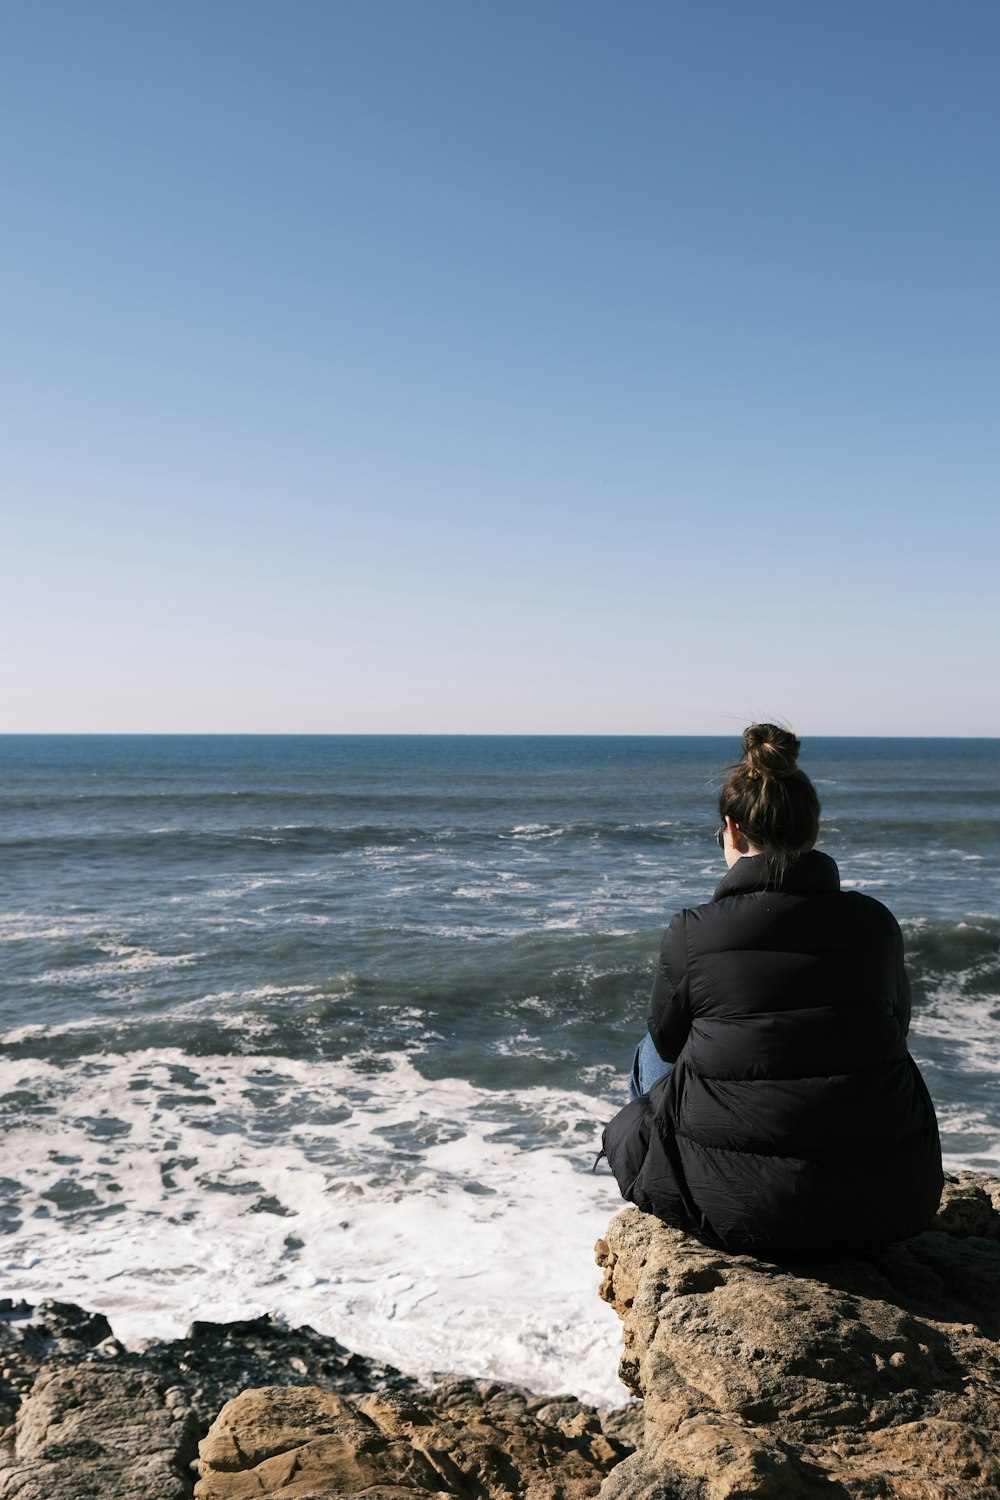 a person sitting on a rock looking out at the ocean